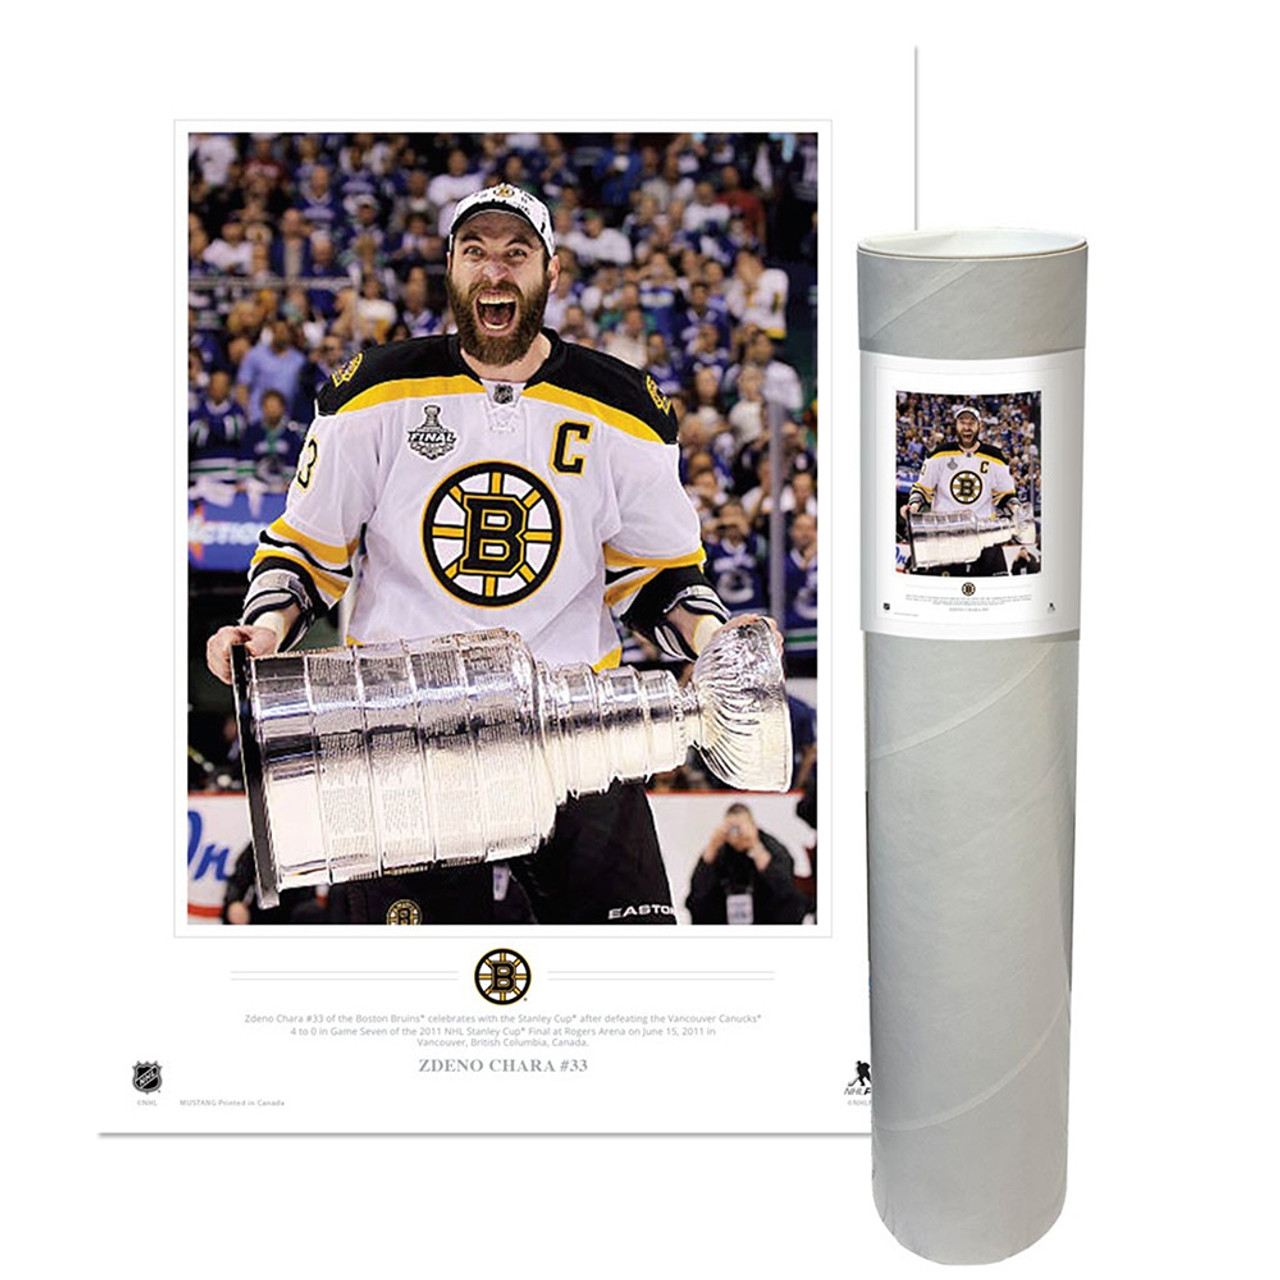 Boston Bruins Stanley Cup & Retired Number Decal Banners Set